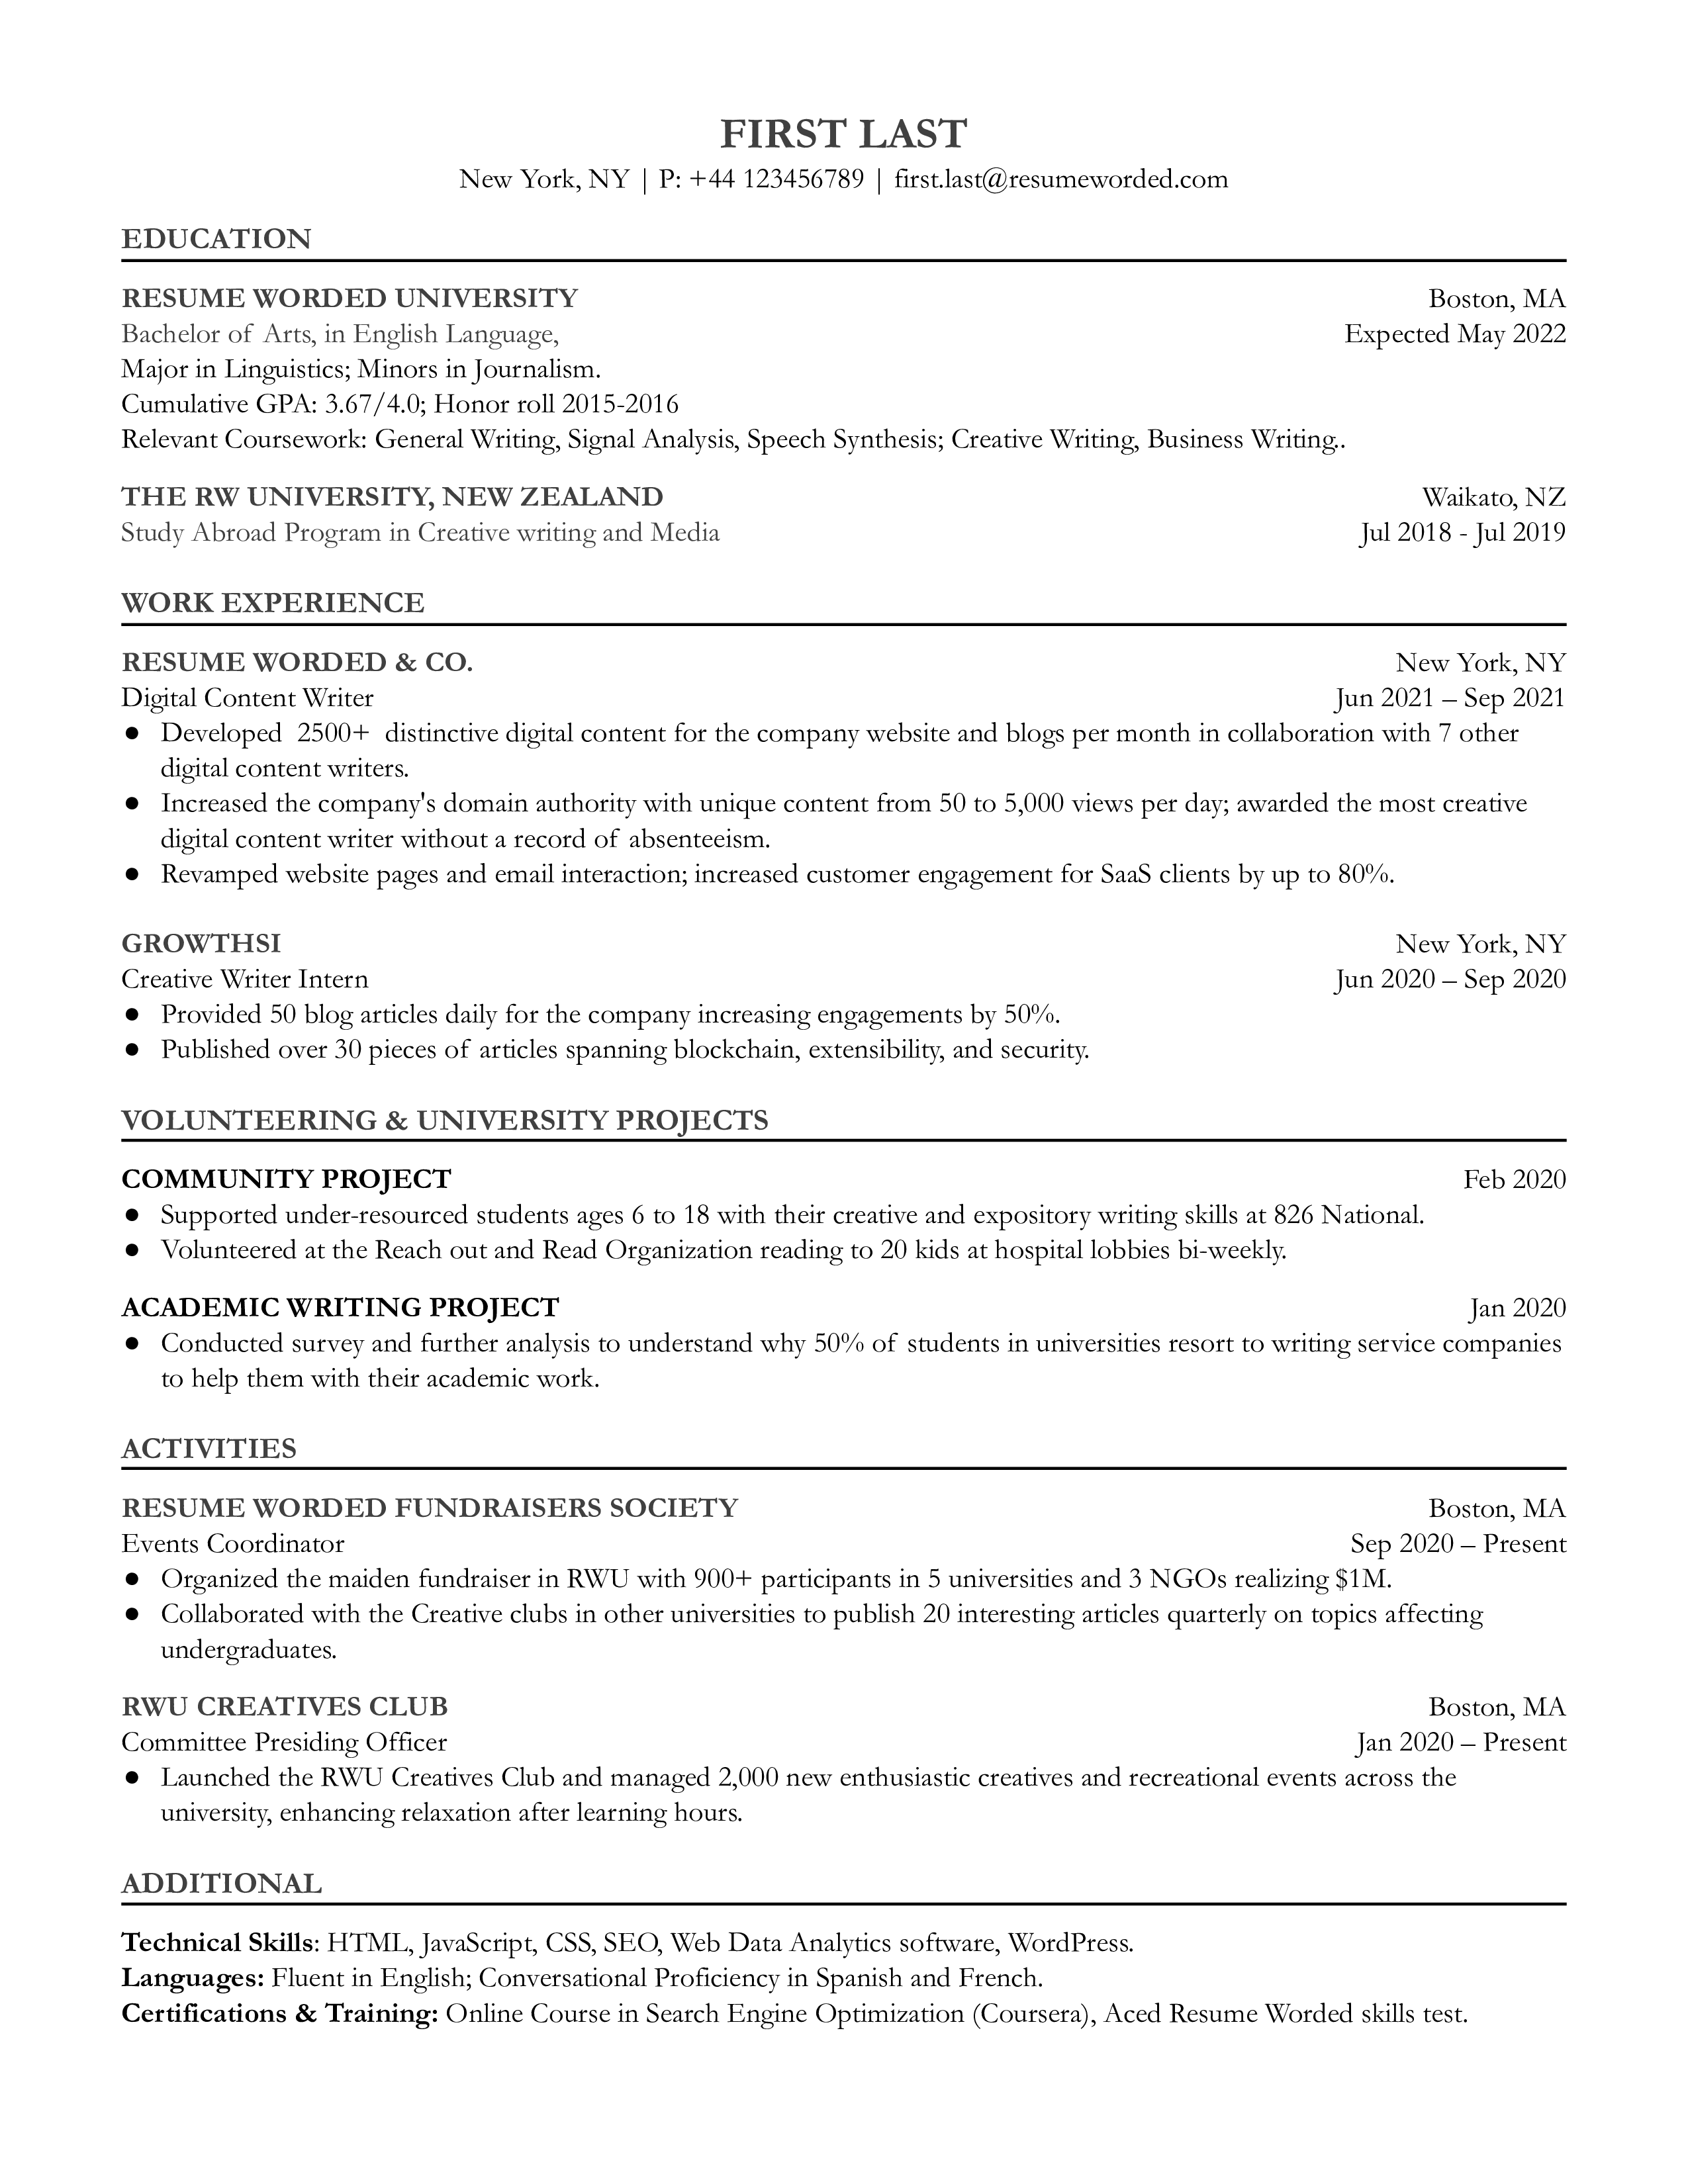 A CV of a digital content writer displaying SEO skills and adaptability.